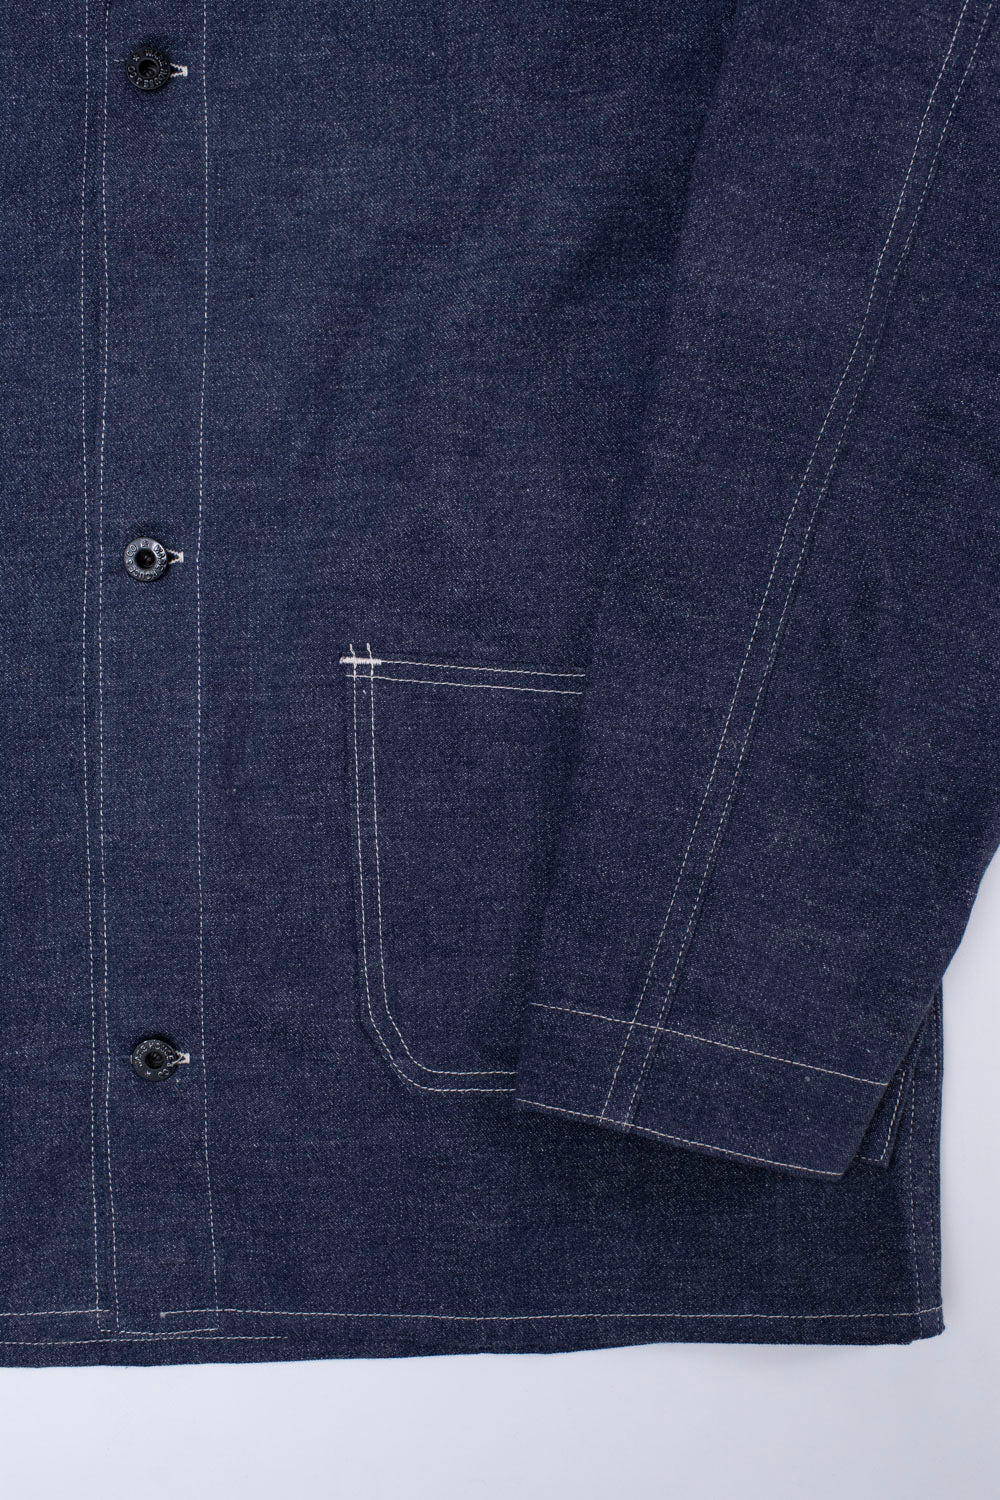 Lot 2192 - Forty and Eight Horse Guard Jacket - Indigo